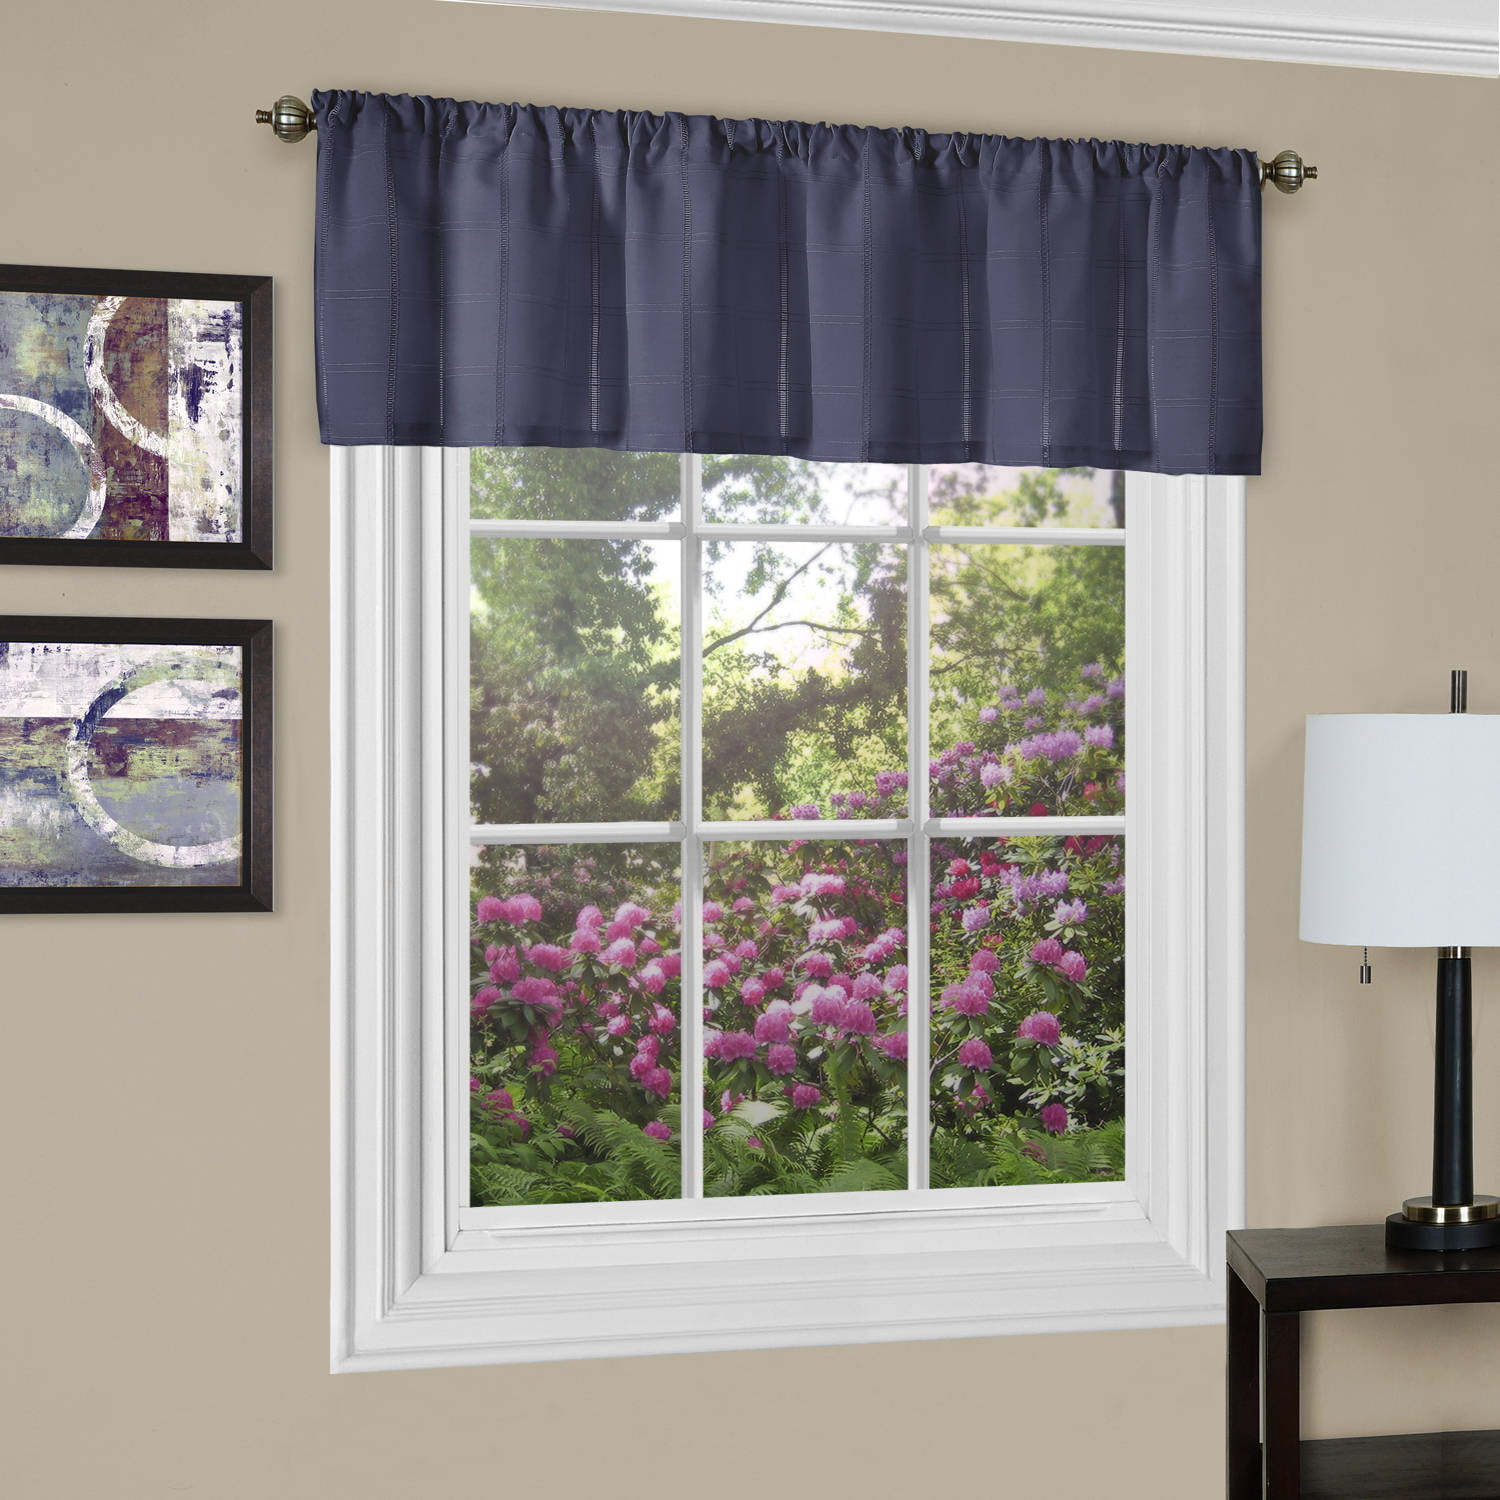 Better Homes and Gardens Ruffled Valance 58 x 17 